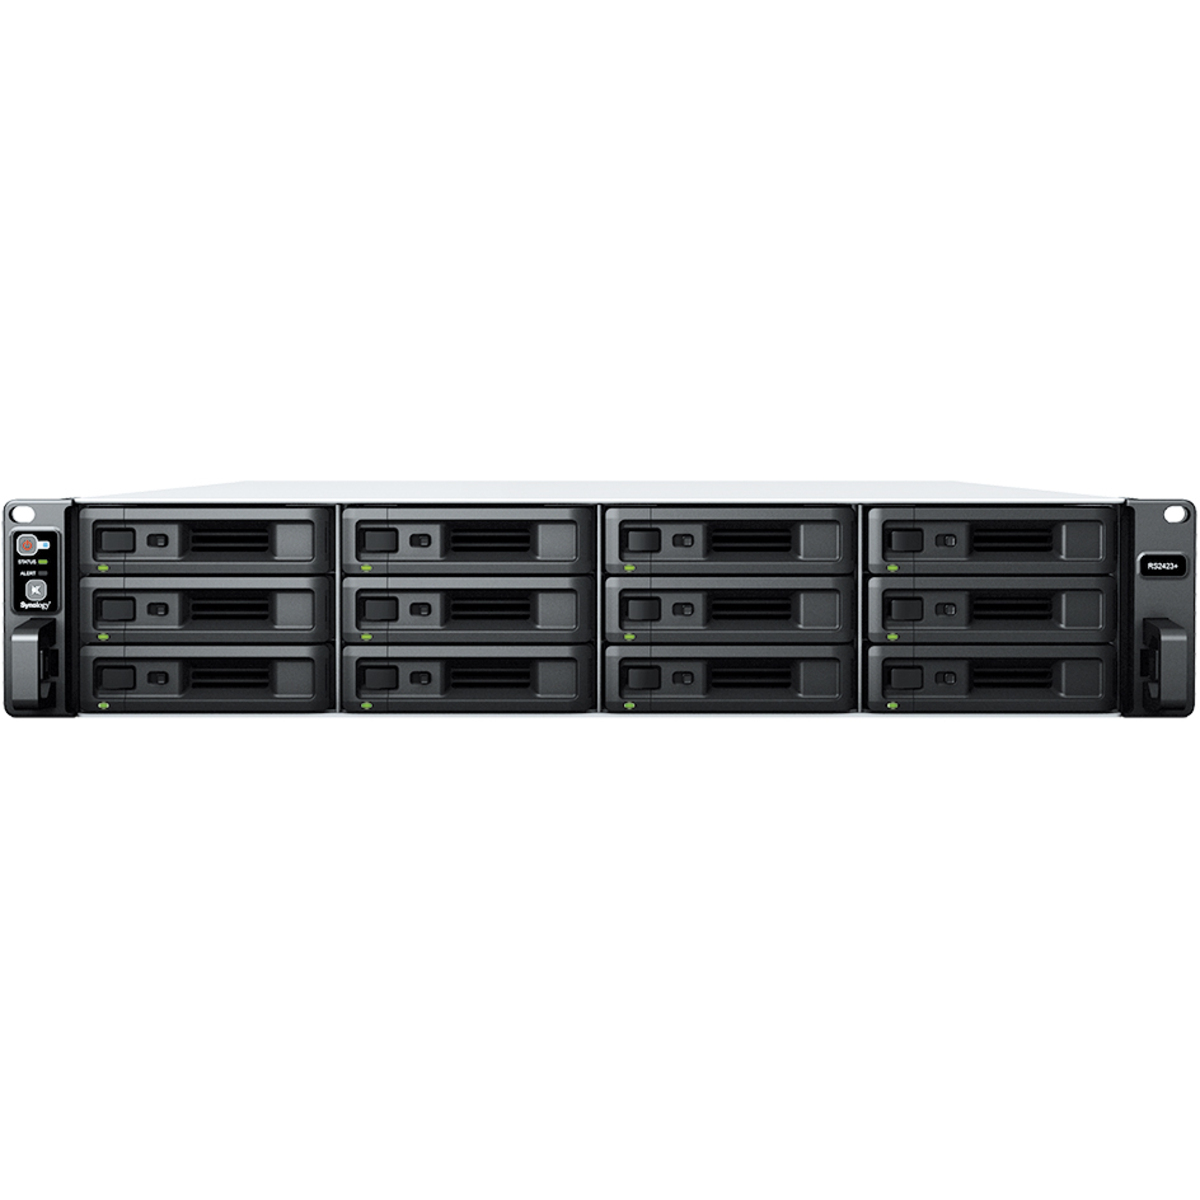 Synology RackStation RS2423+ 126tb 12-Bay RackMount Multimedia / Power User / Business NAS - Network Attached Storage Device 9x14tb Seagate EXOS X18 ST14000NM000J 3.5 7200rpm SATA 6Gb/s HDD ENTERPRISE Class Drives Installed - Burn-In Tested RackStation RS2423+